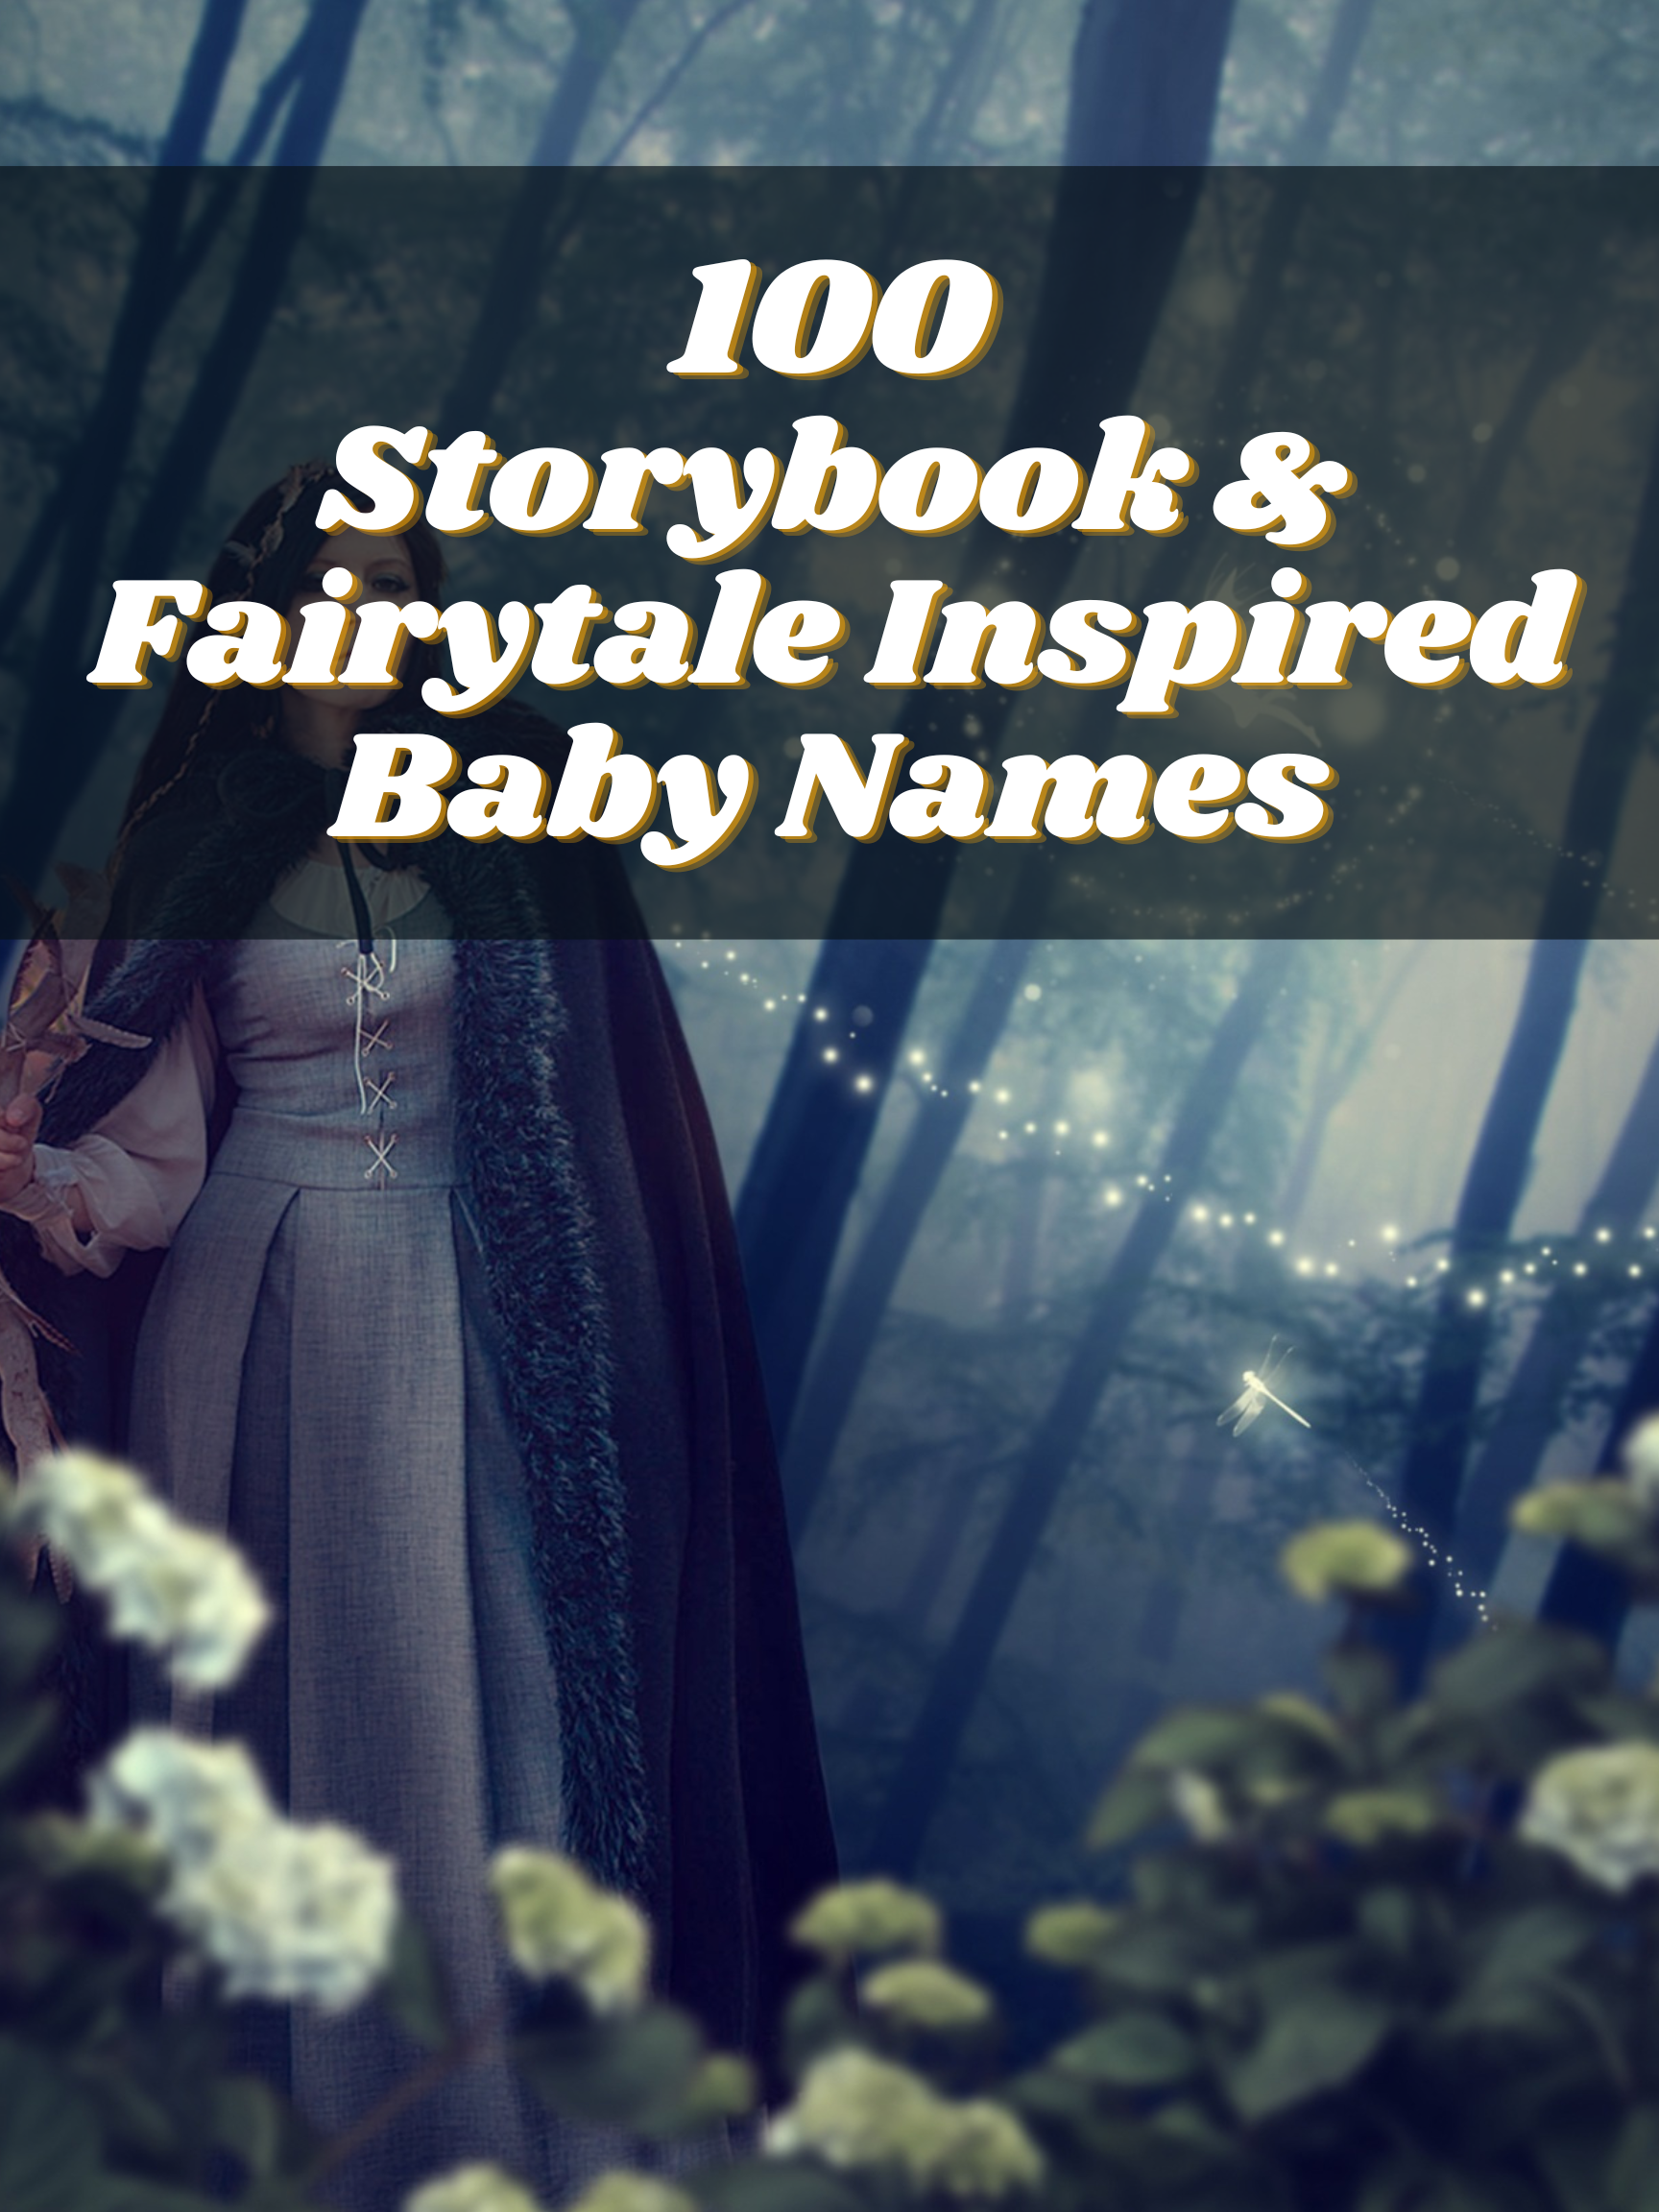 100 Storybook & Fairytale Inspired Baby Names